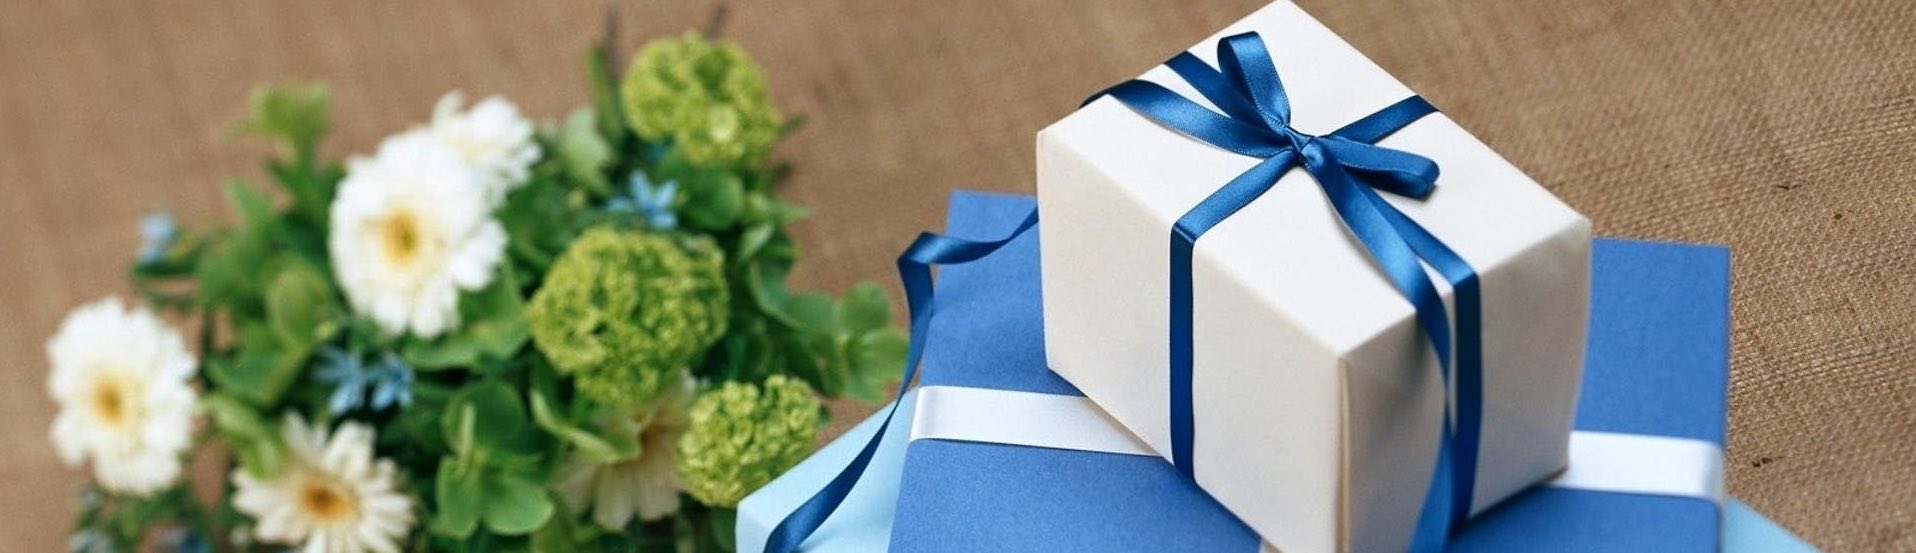 Well Mannered: What Do I Do If a Birthday Invite Says No Gifts? - Lauren  Conrad